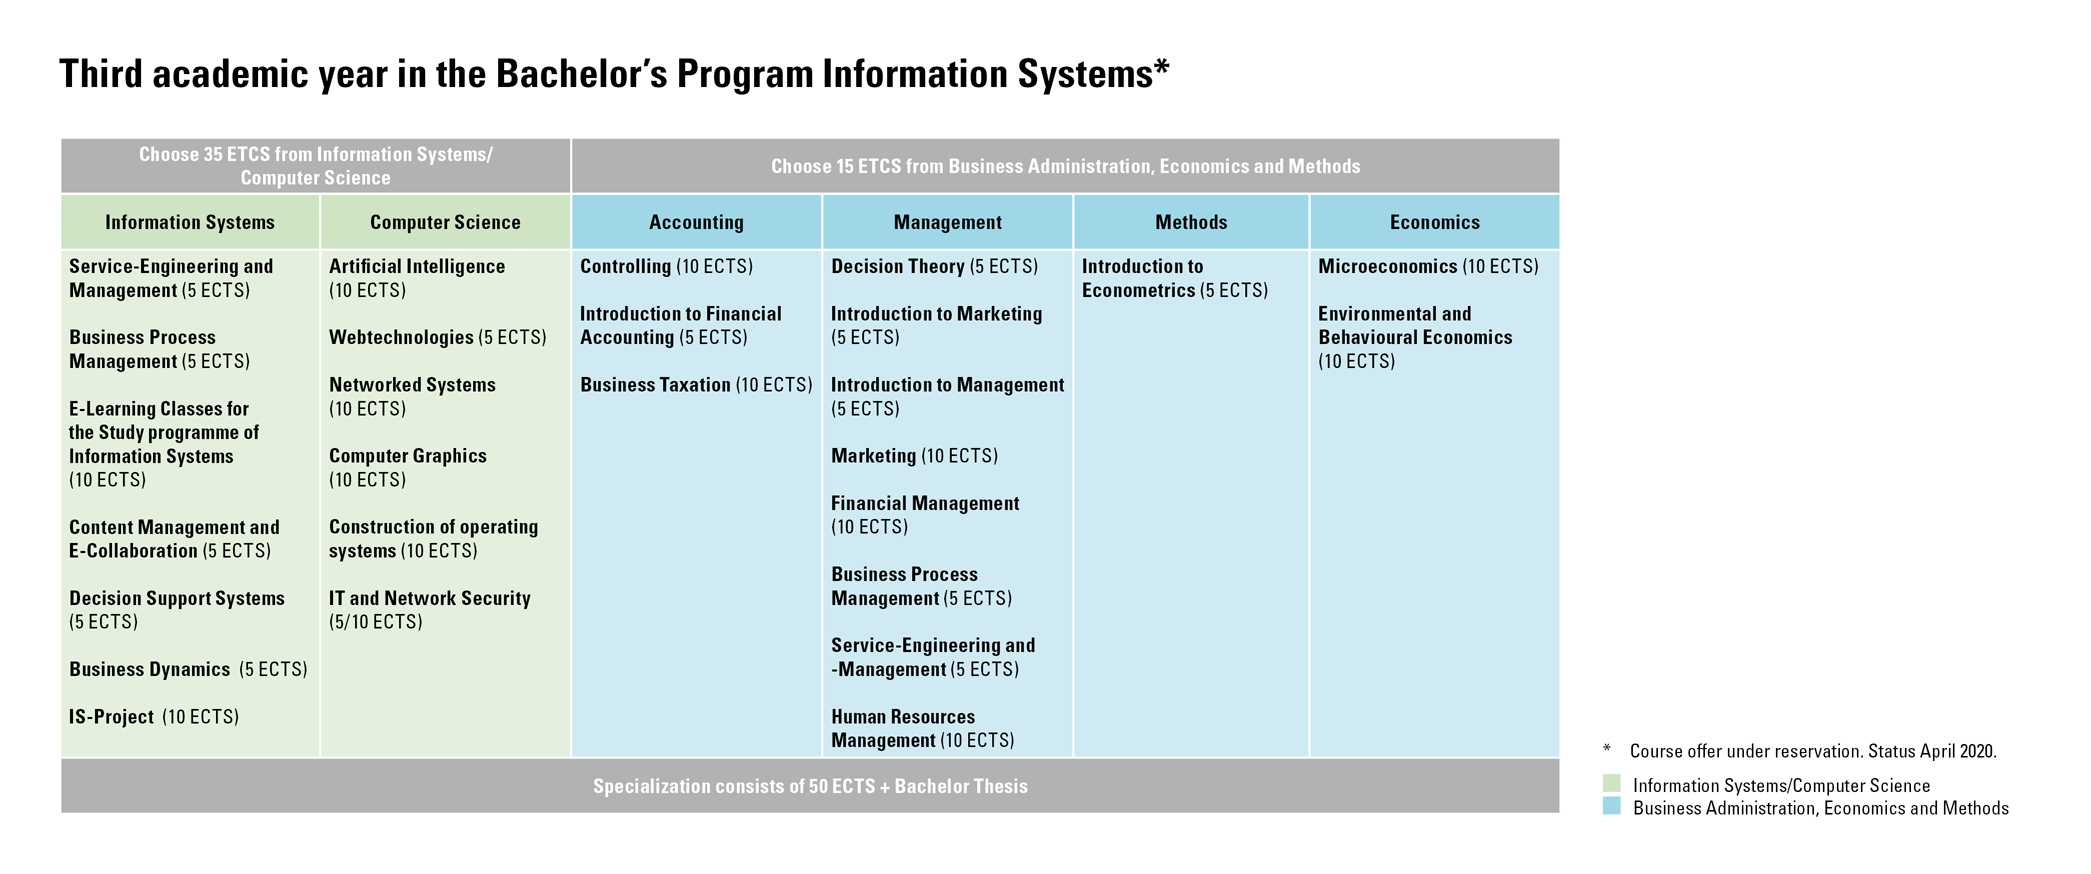 Third academic year in Bachelor Program Information Systems